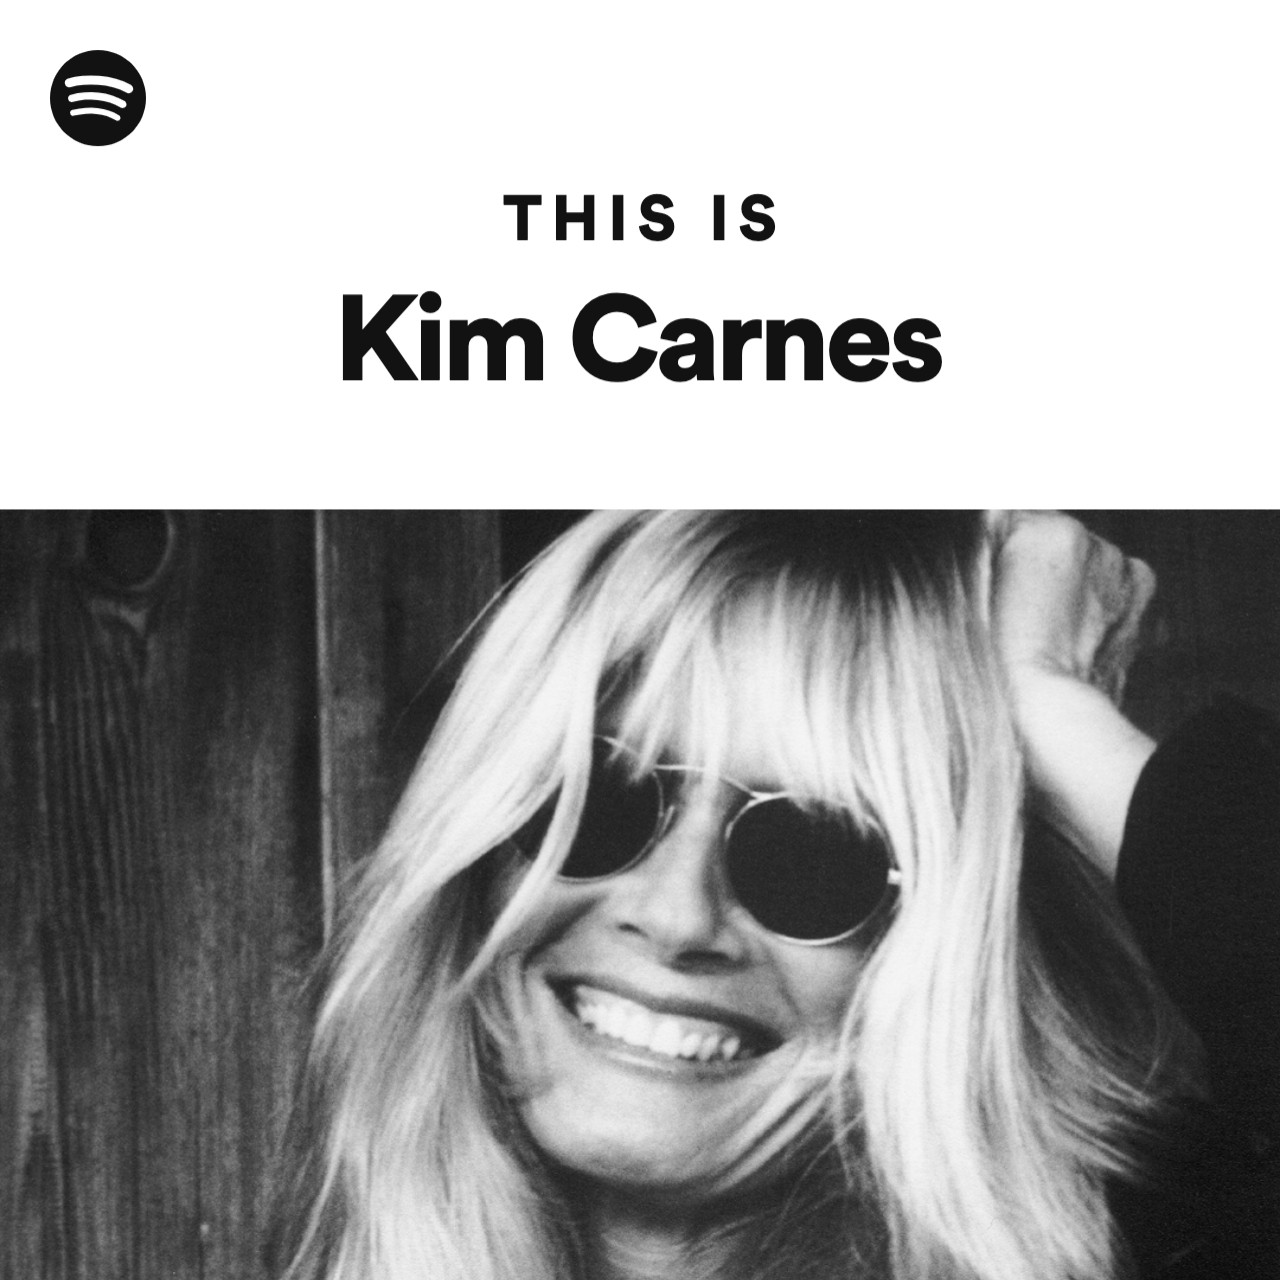 This Is Kim Carnes